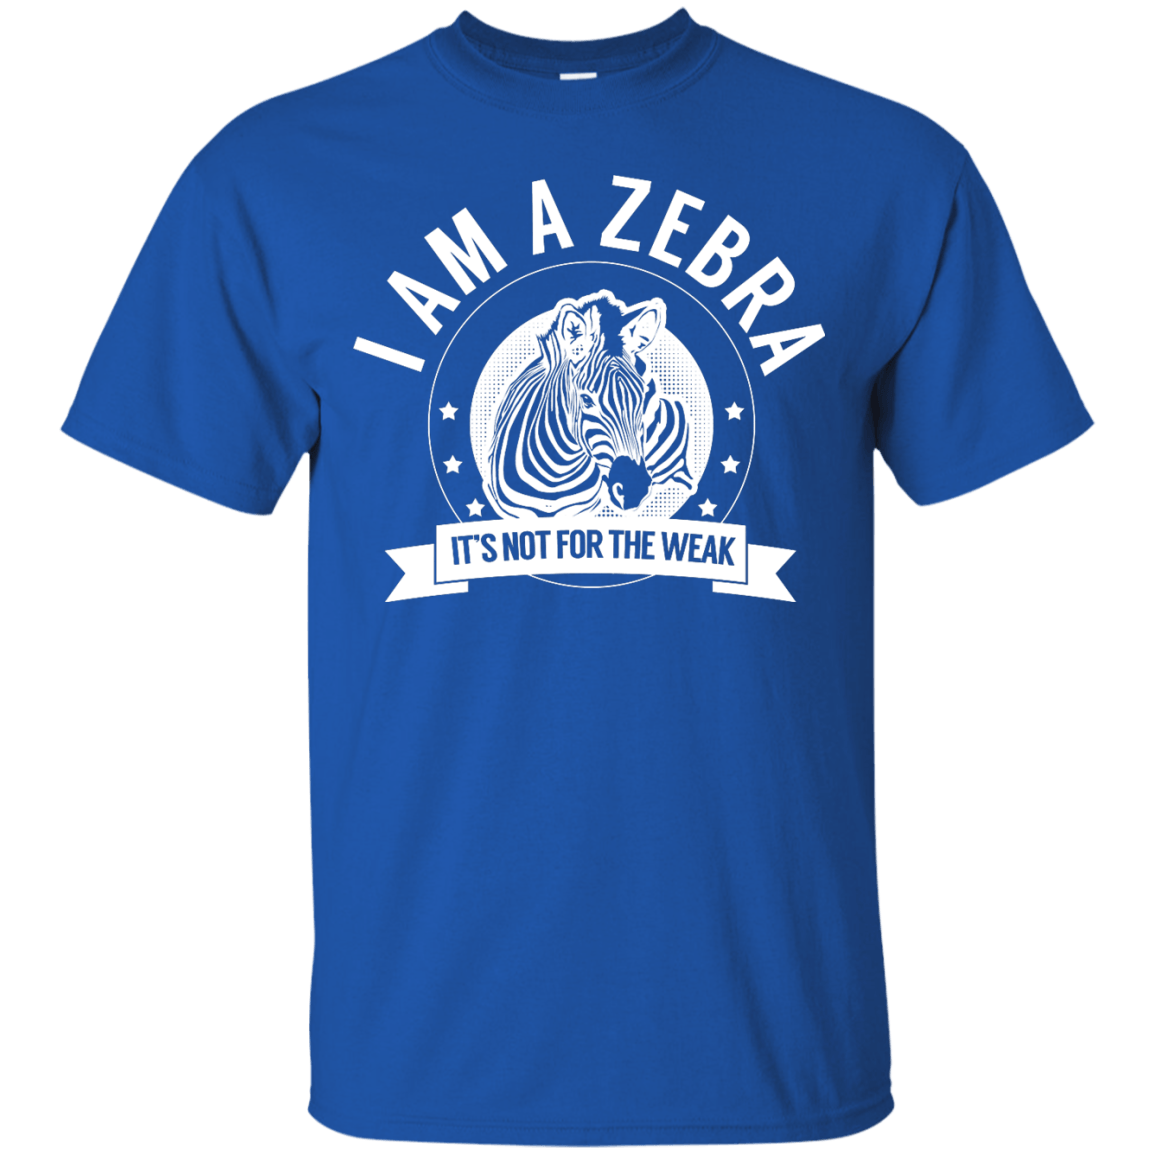 Zebra Warrior Not for the Weak Unisex Shirt - The Unchargeables